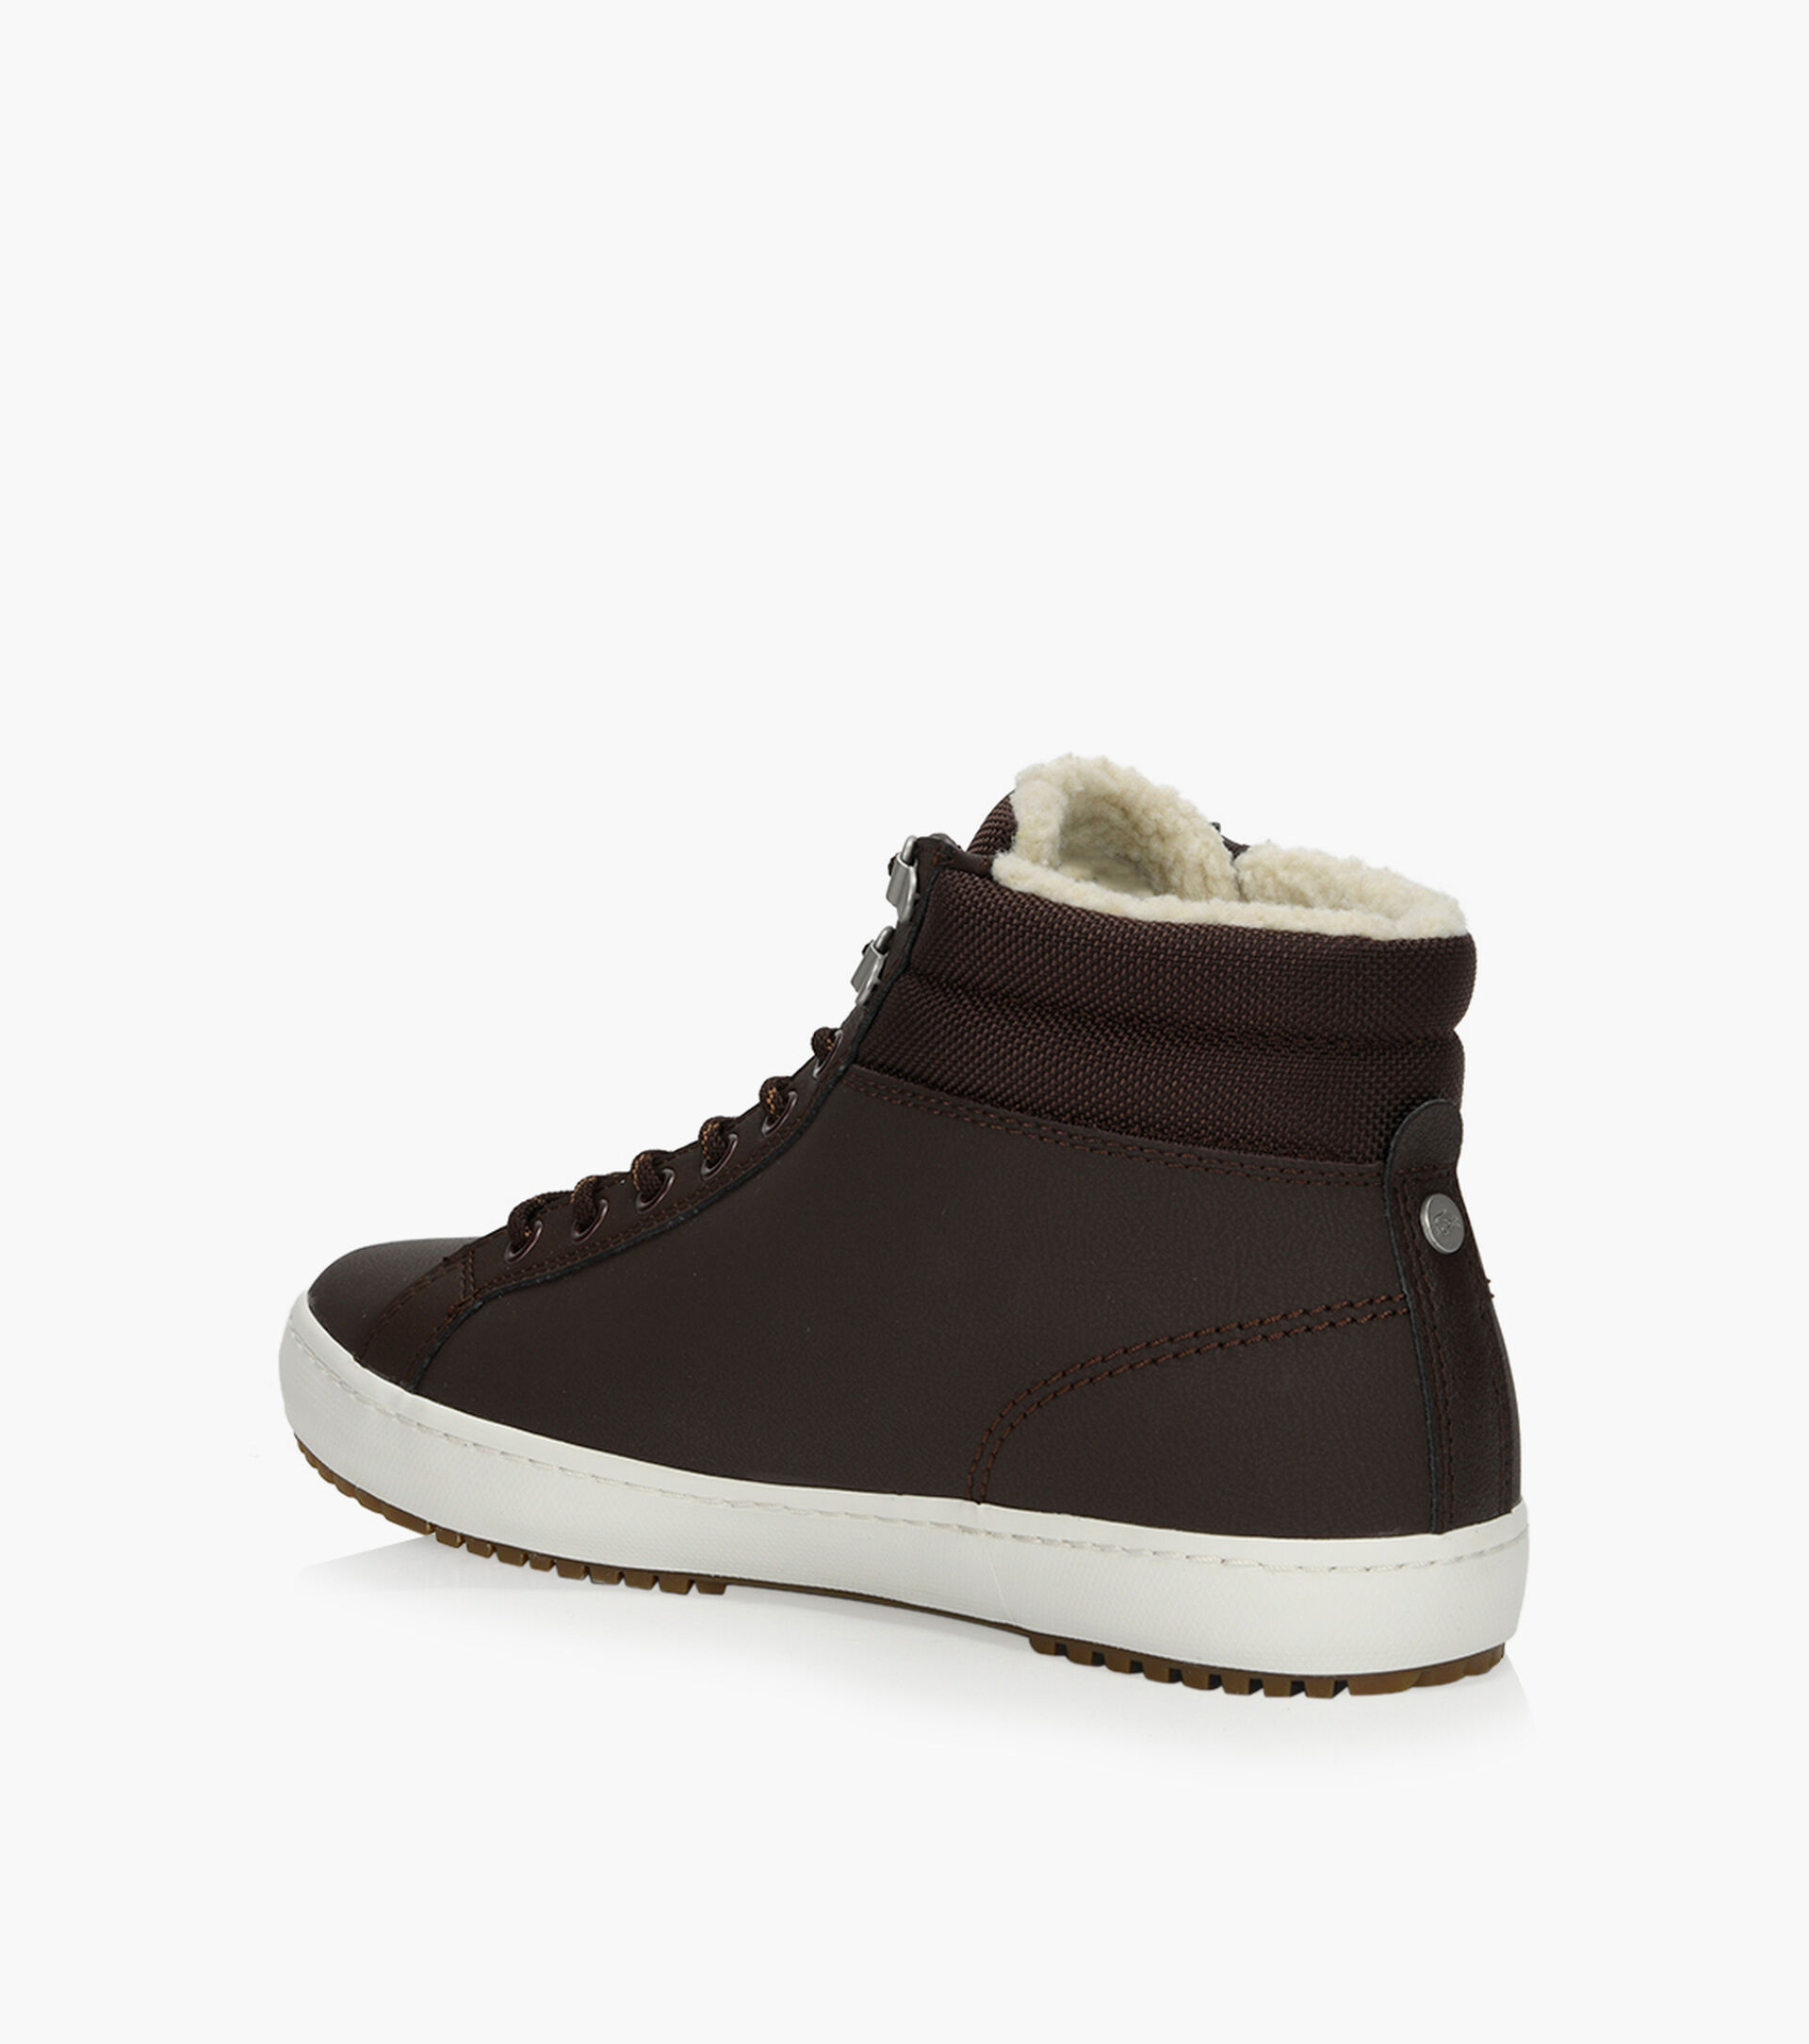 LACOSTE STRAIGHTSET THERMO 419-2 - Brown Leather | Browns Shoes